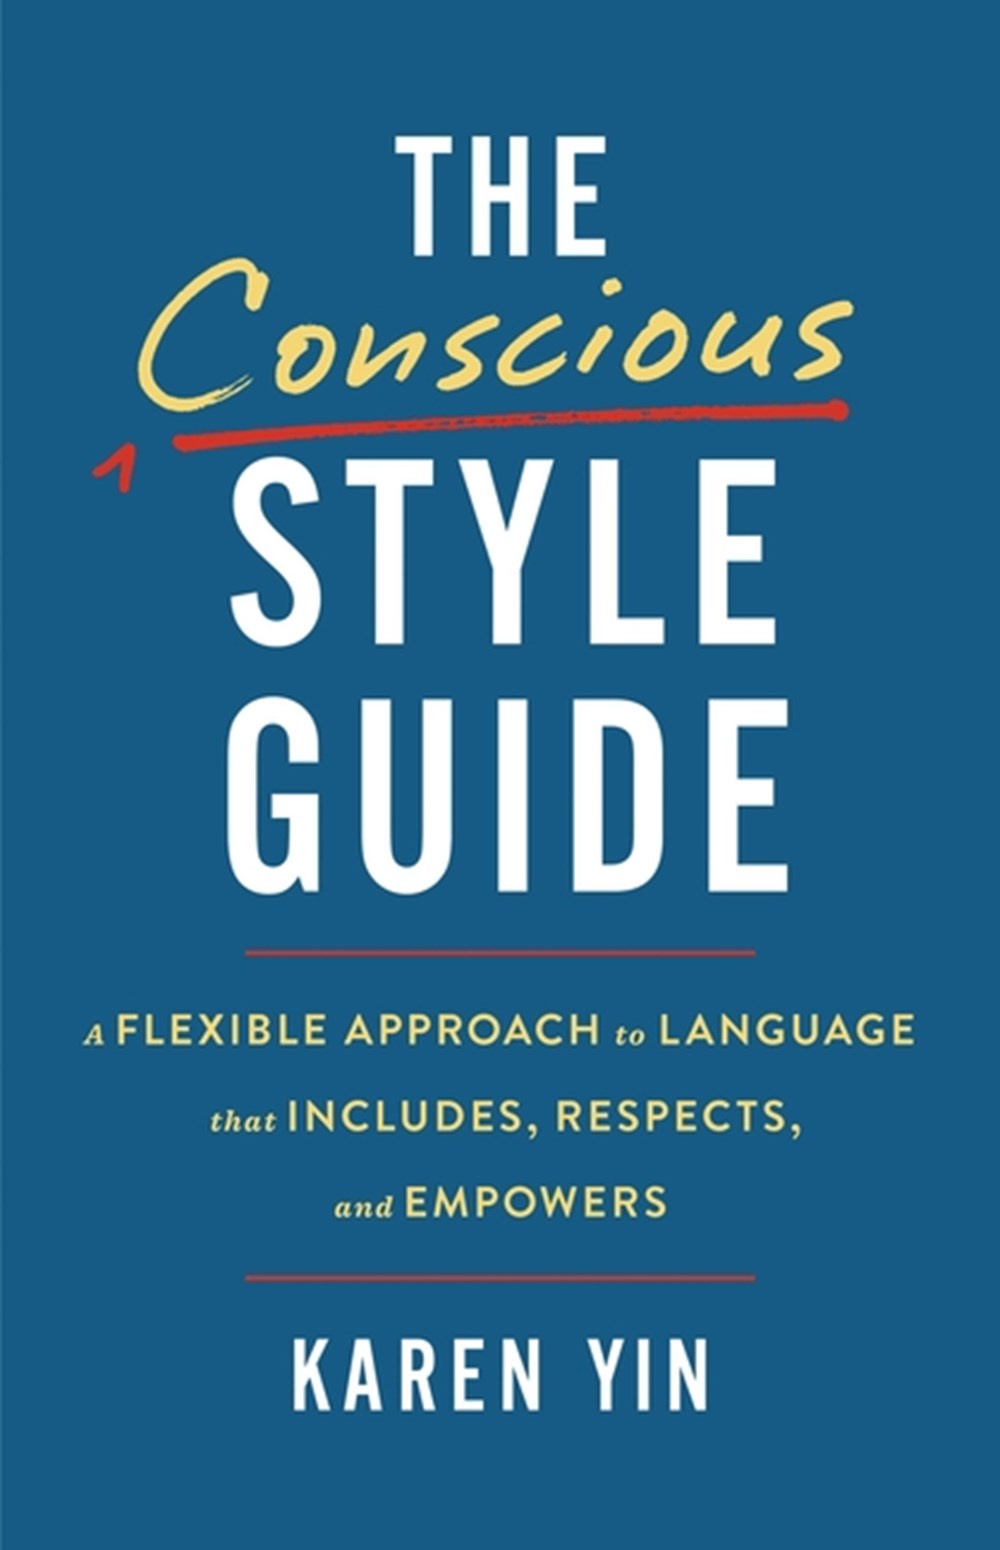 Conscious Style Guide: A Flexible Approach to Language That Includes, Respects, and Empowers